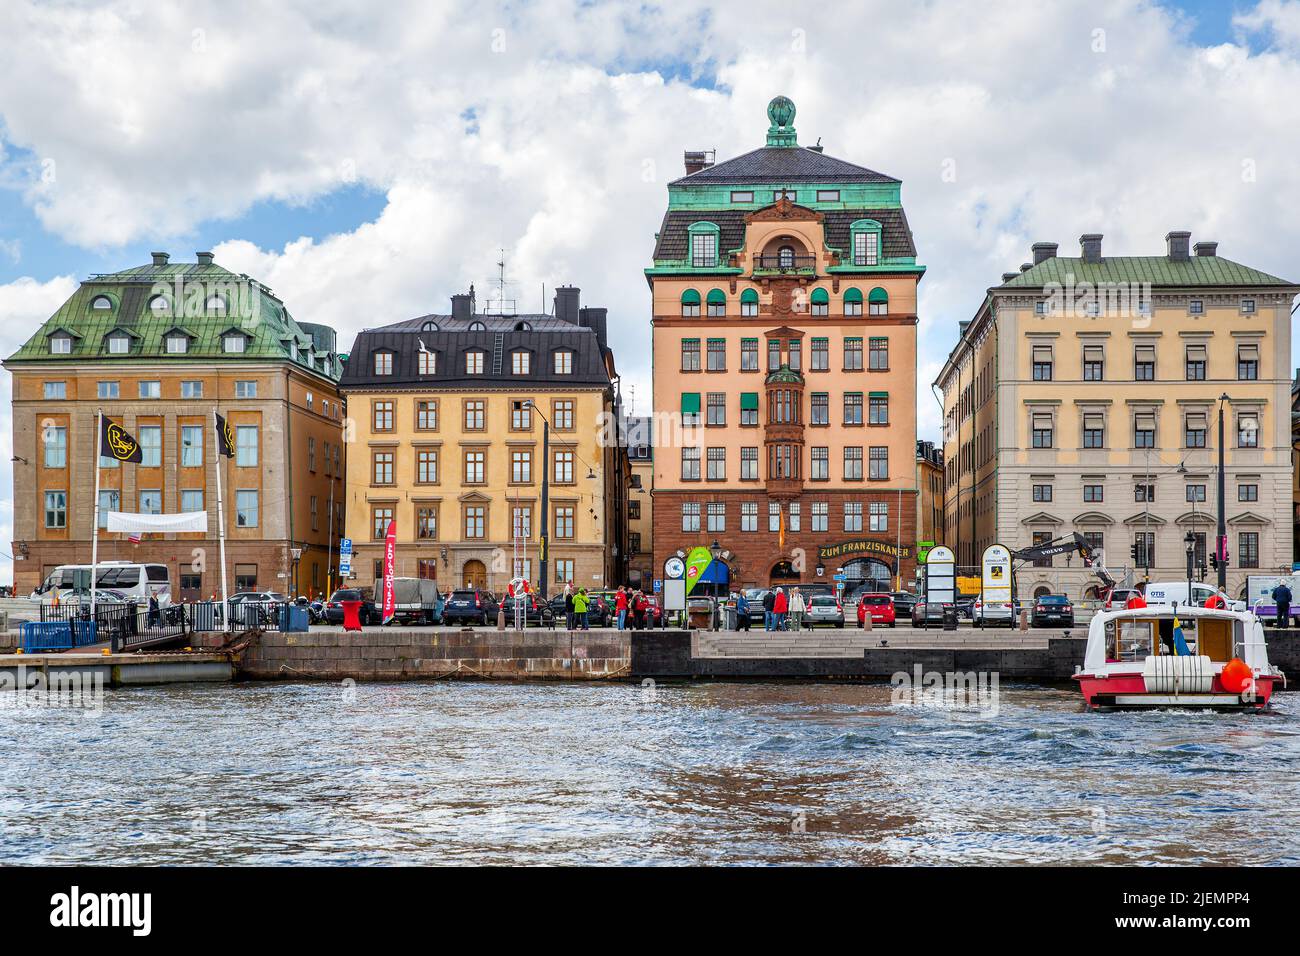 Stockholm, Sweden - May 20, 2015: Buildings on the waterfront in the Old Town of Stockholm (Gamla Stan) Stock Photo